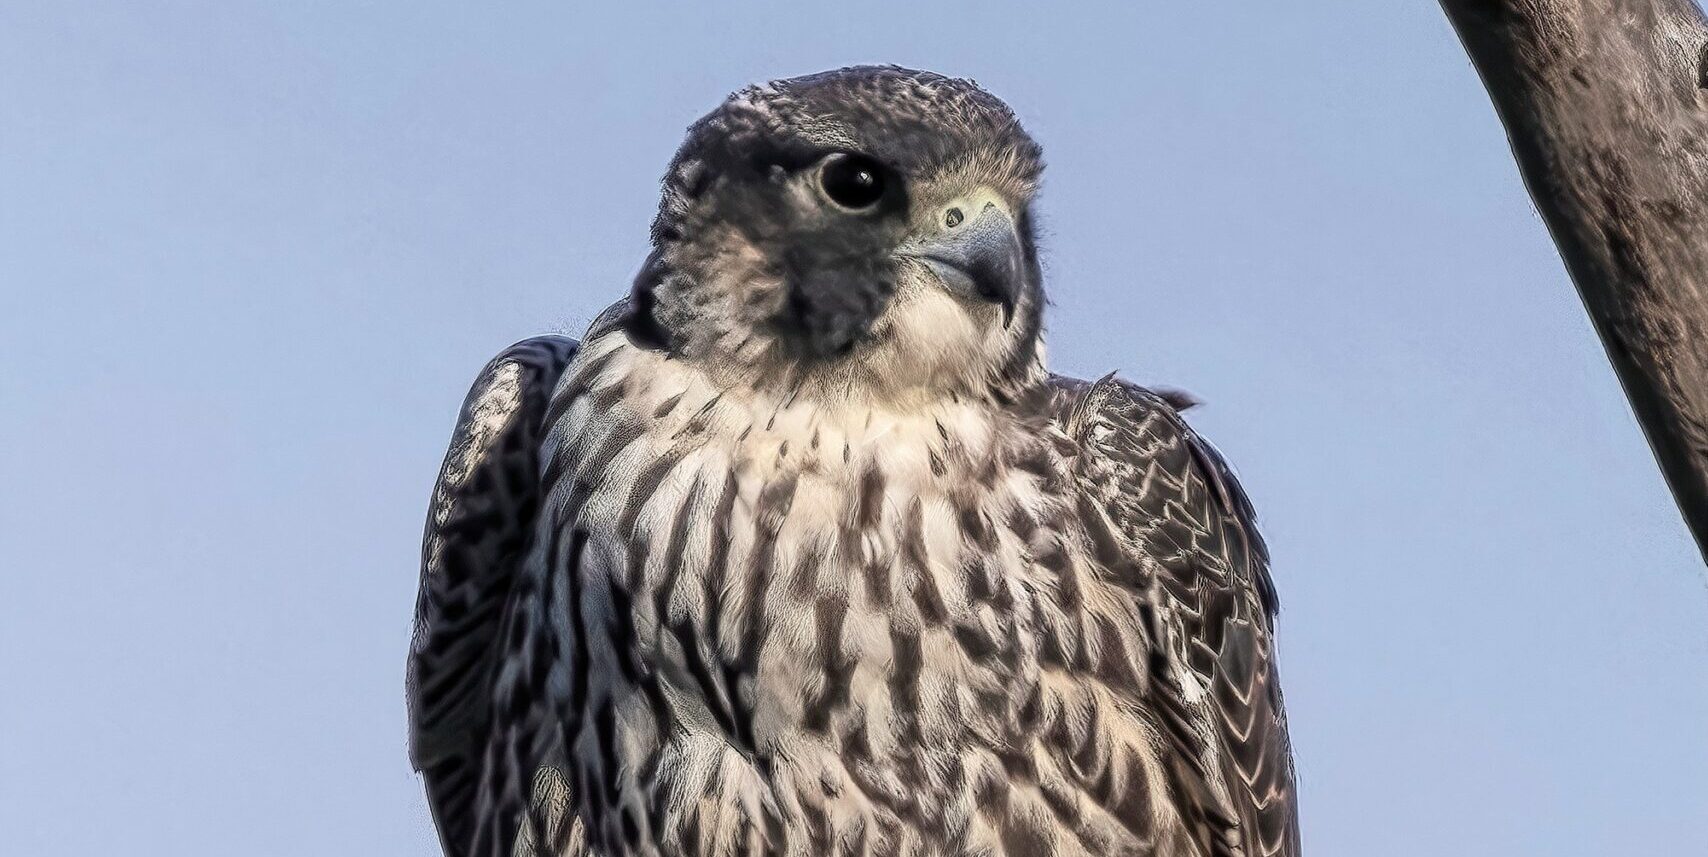 A peregrine falcon with blue-grey feathers sits on top of a tree branch.